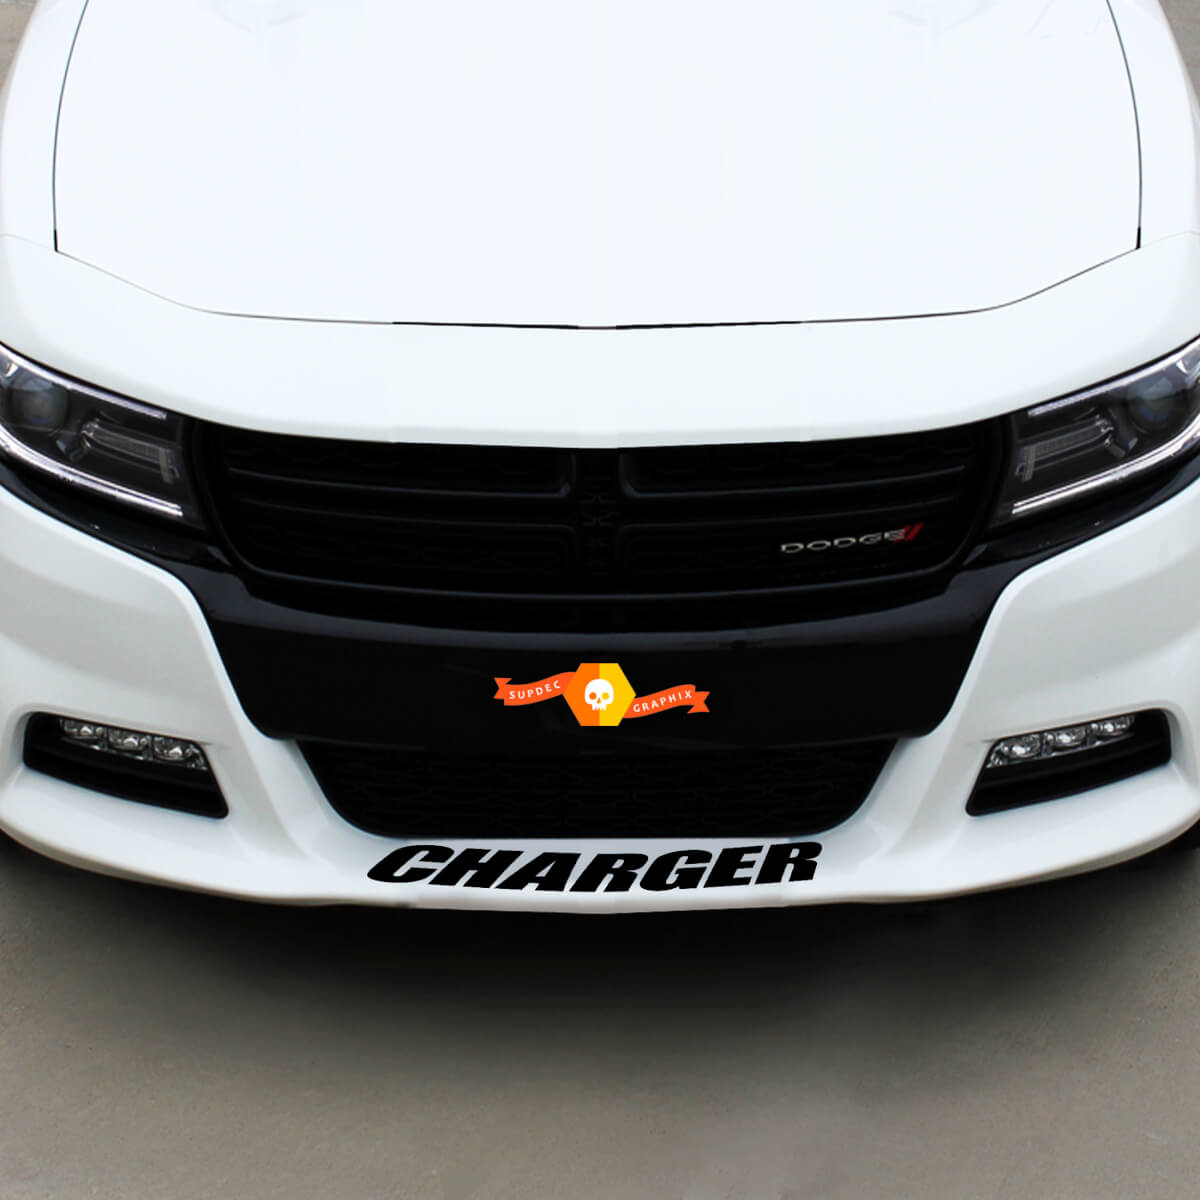 Dodge Charger front Spoiler Decal Sticker graphics fits to all models